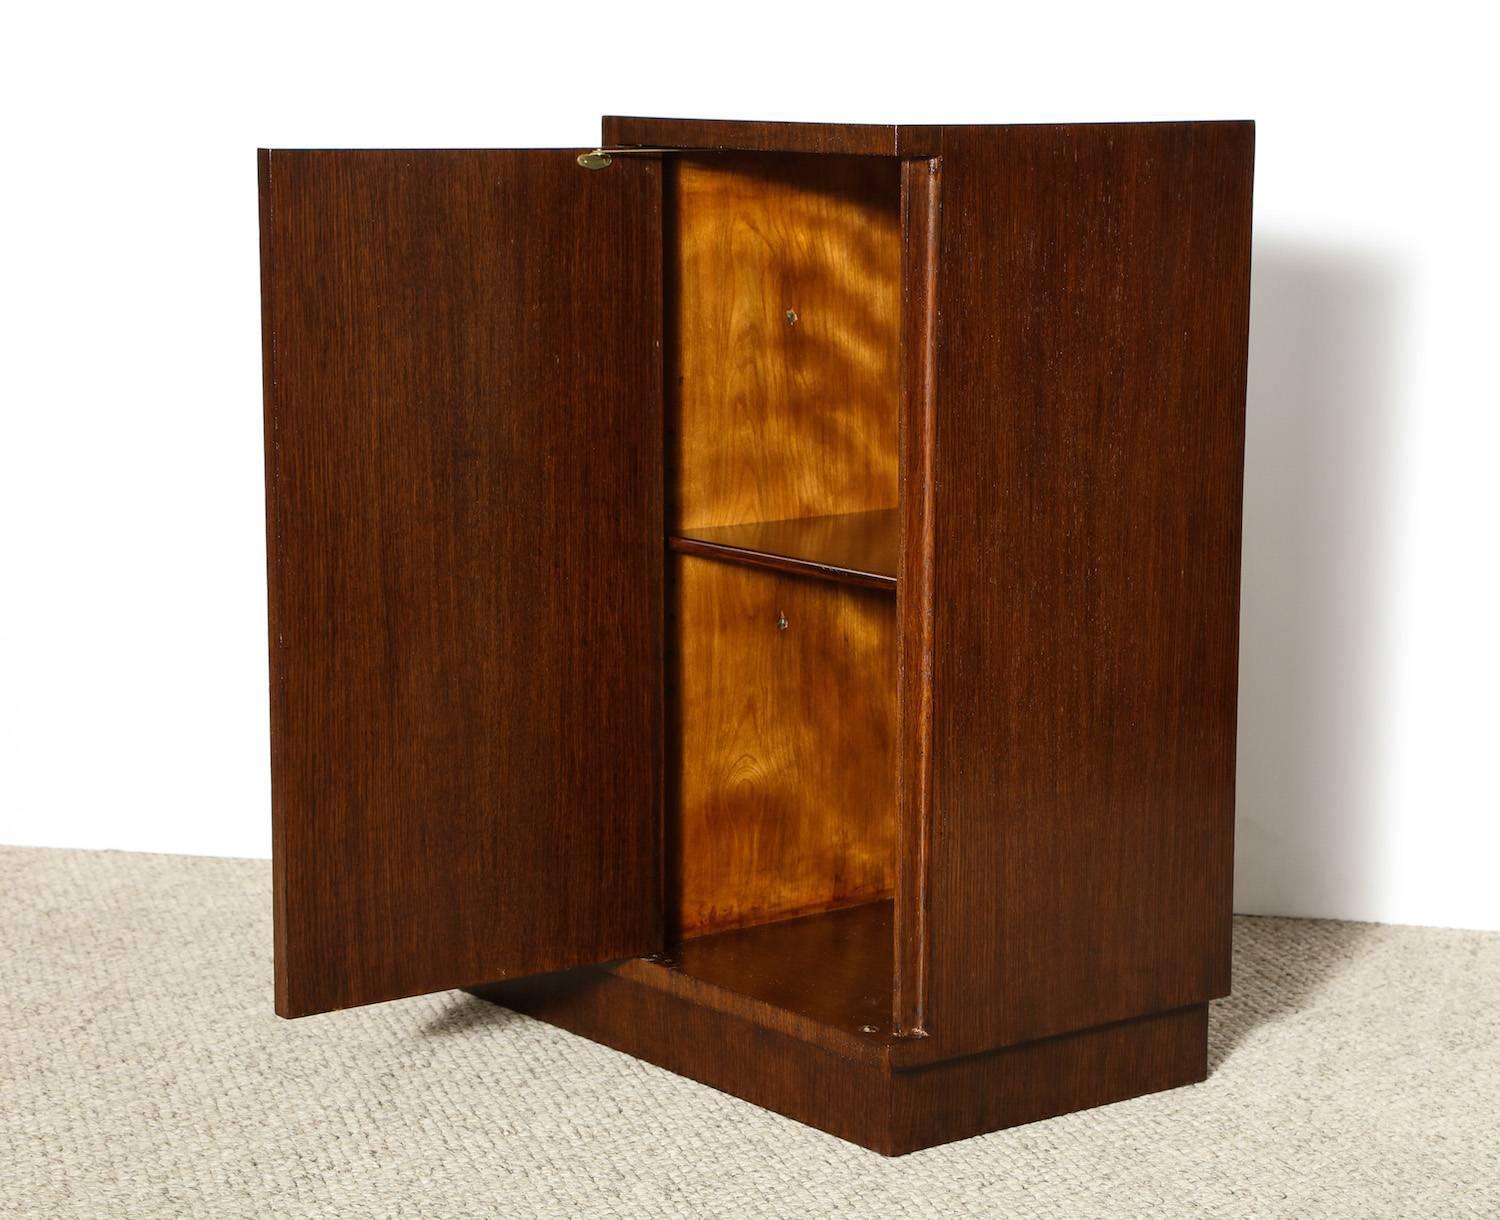 Custom designed by Eugene Schoen and built by Schmieg & Kotzien Cabinet Makers. English bog oak with open and concealed storage. This piece was designed for the Morris & Gwendolyn Cafritz Home in Washington DC. Stamped E.S. & S.K.